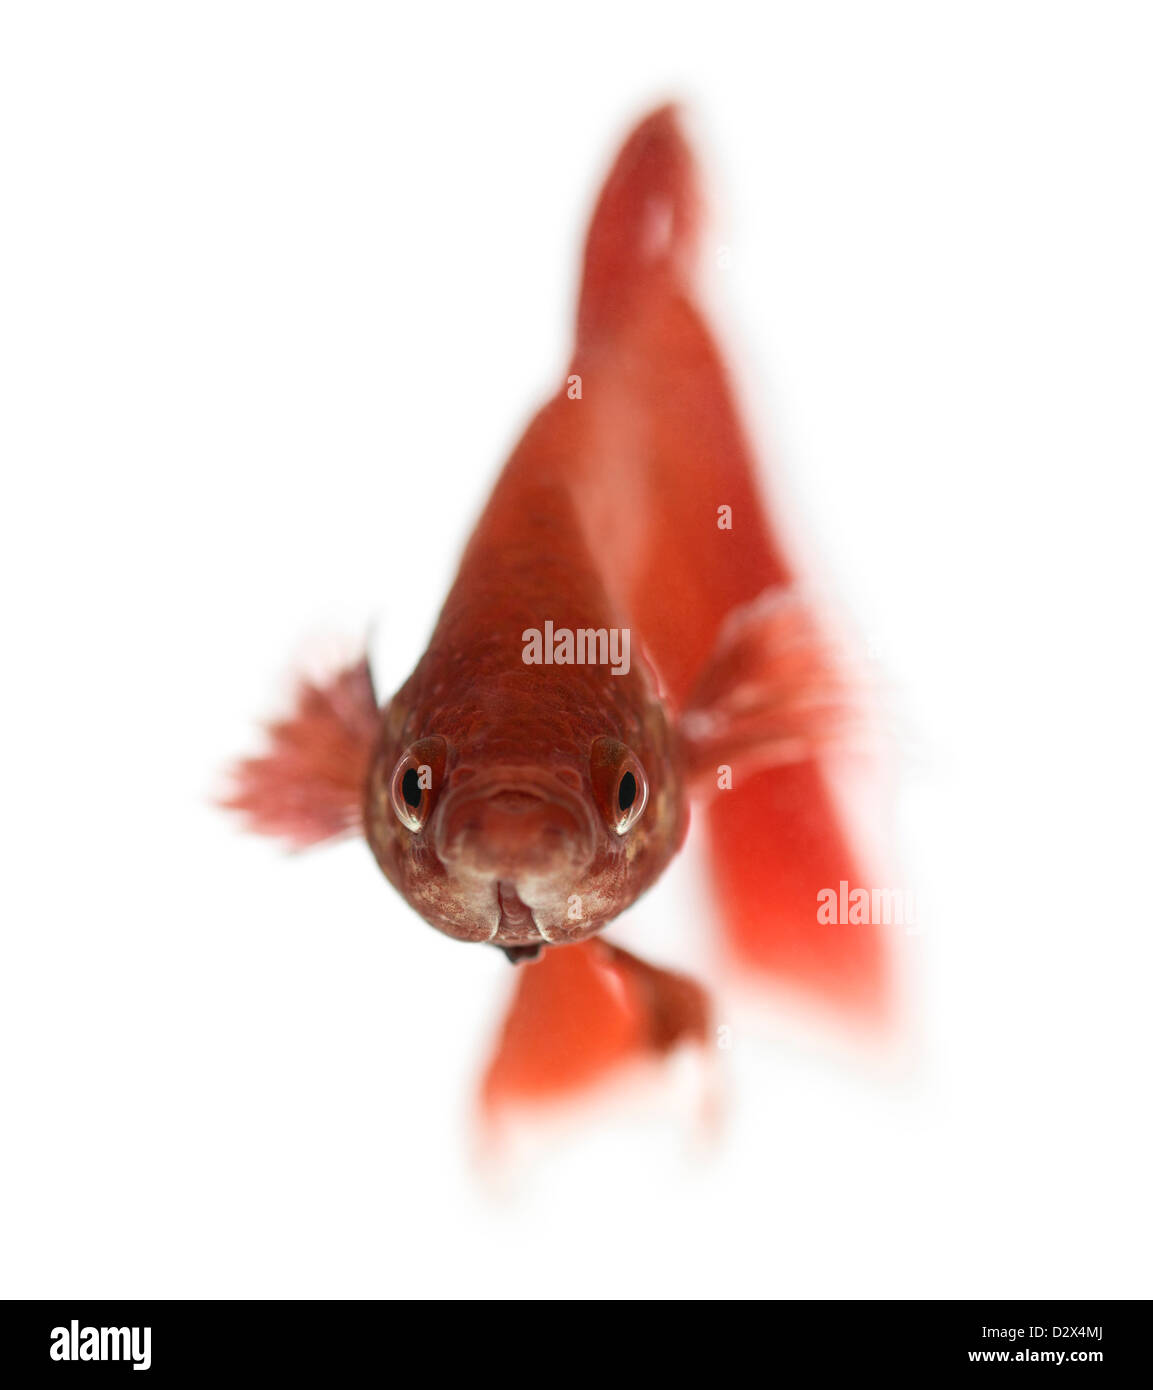 Front view of a Siamese fighting fish, Betta splendens, against white background Stock Photo